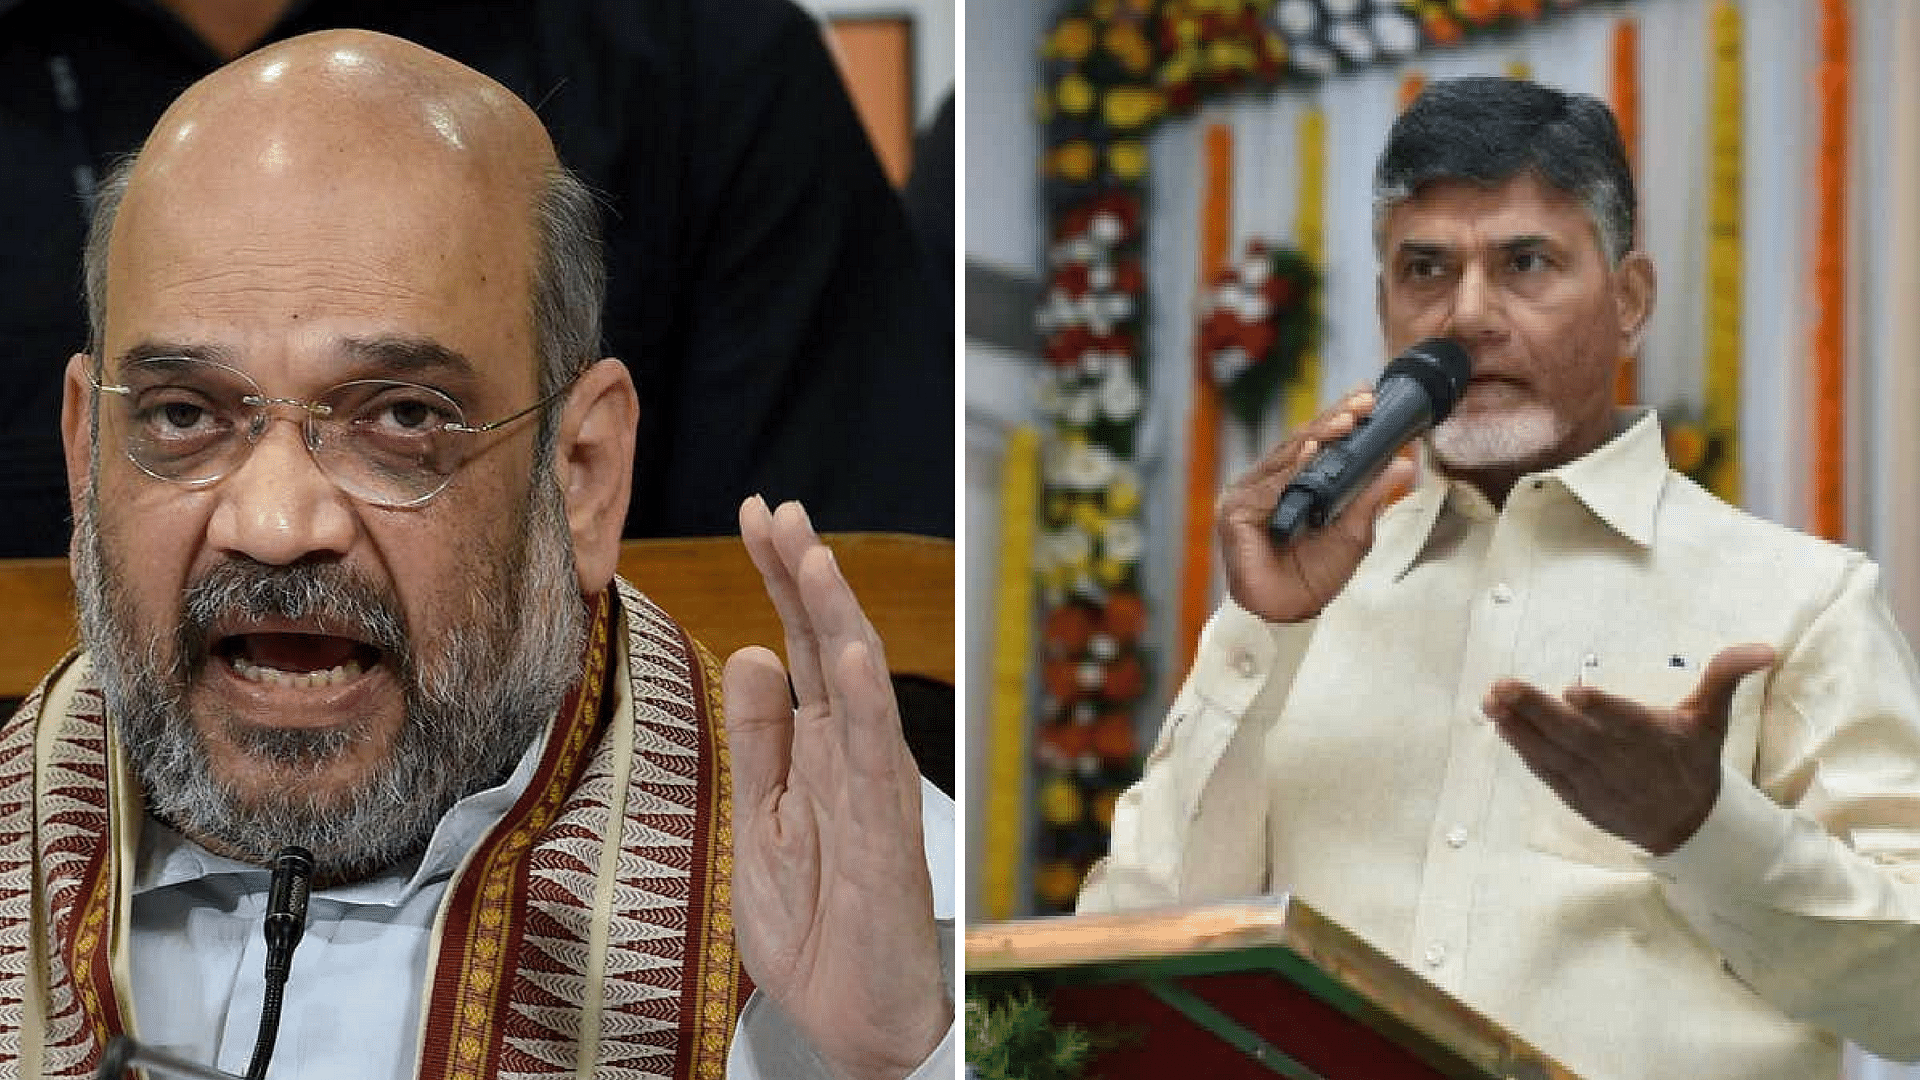 Andhra Pradesh Chief Minister N Chandrababu Naidu lashes out at BJP Chief Amit Shah for “interfering” in the states administration and questioning use of state funds.